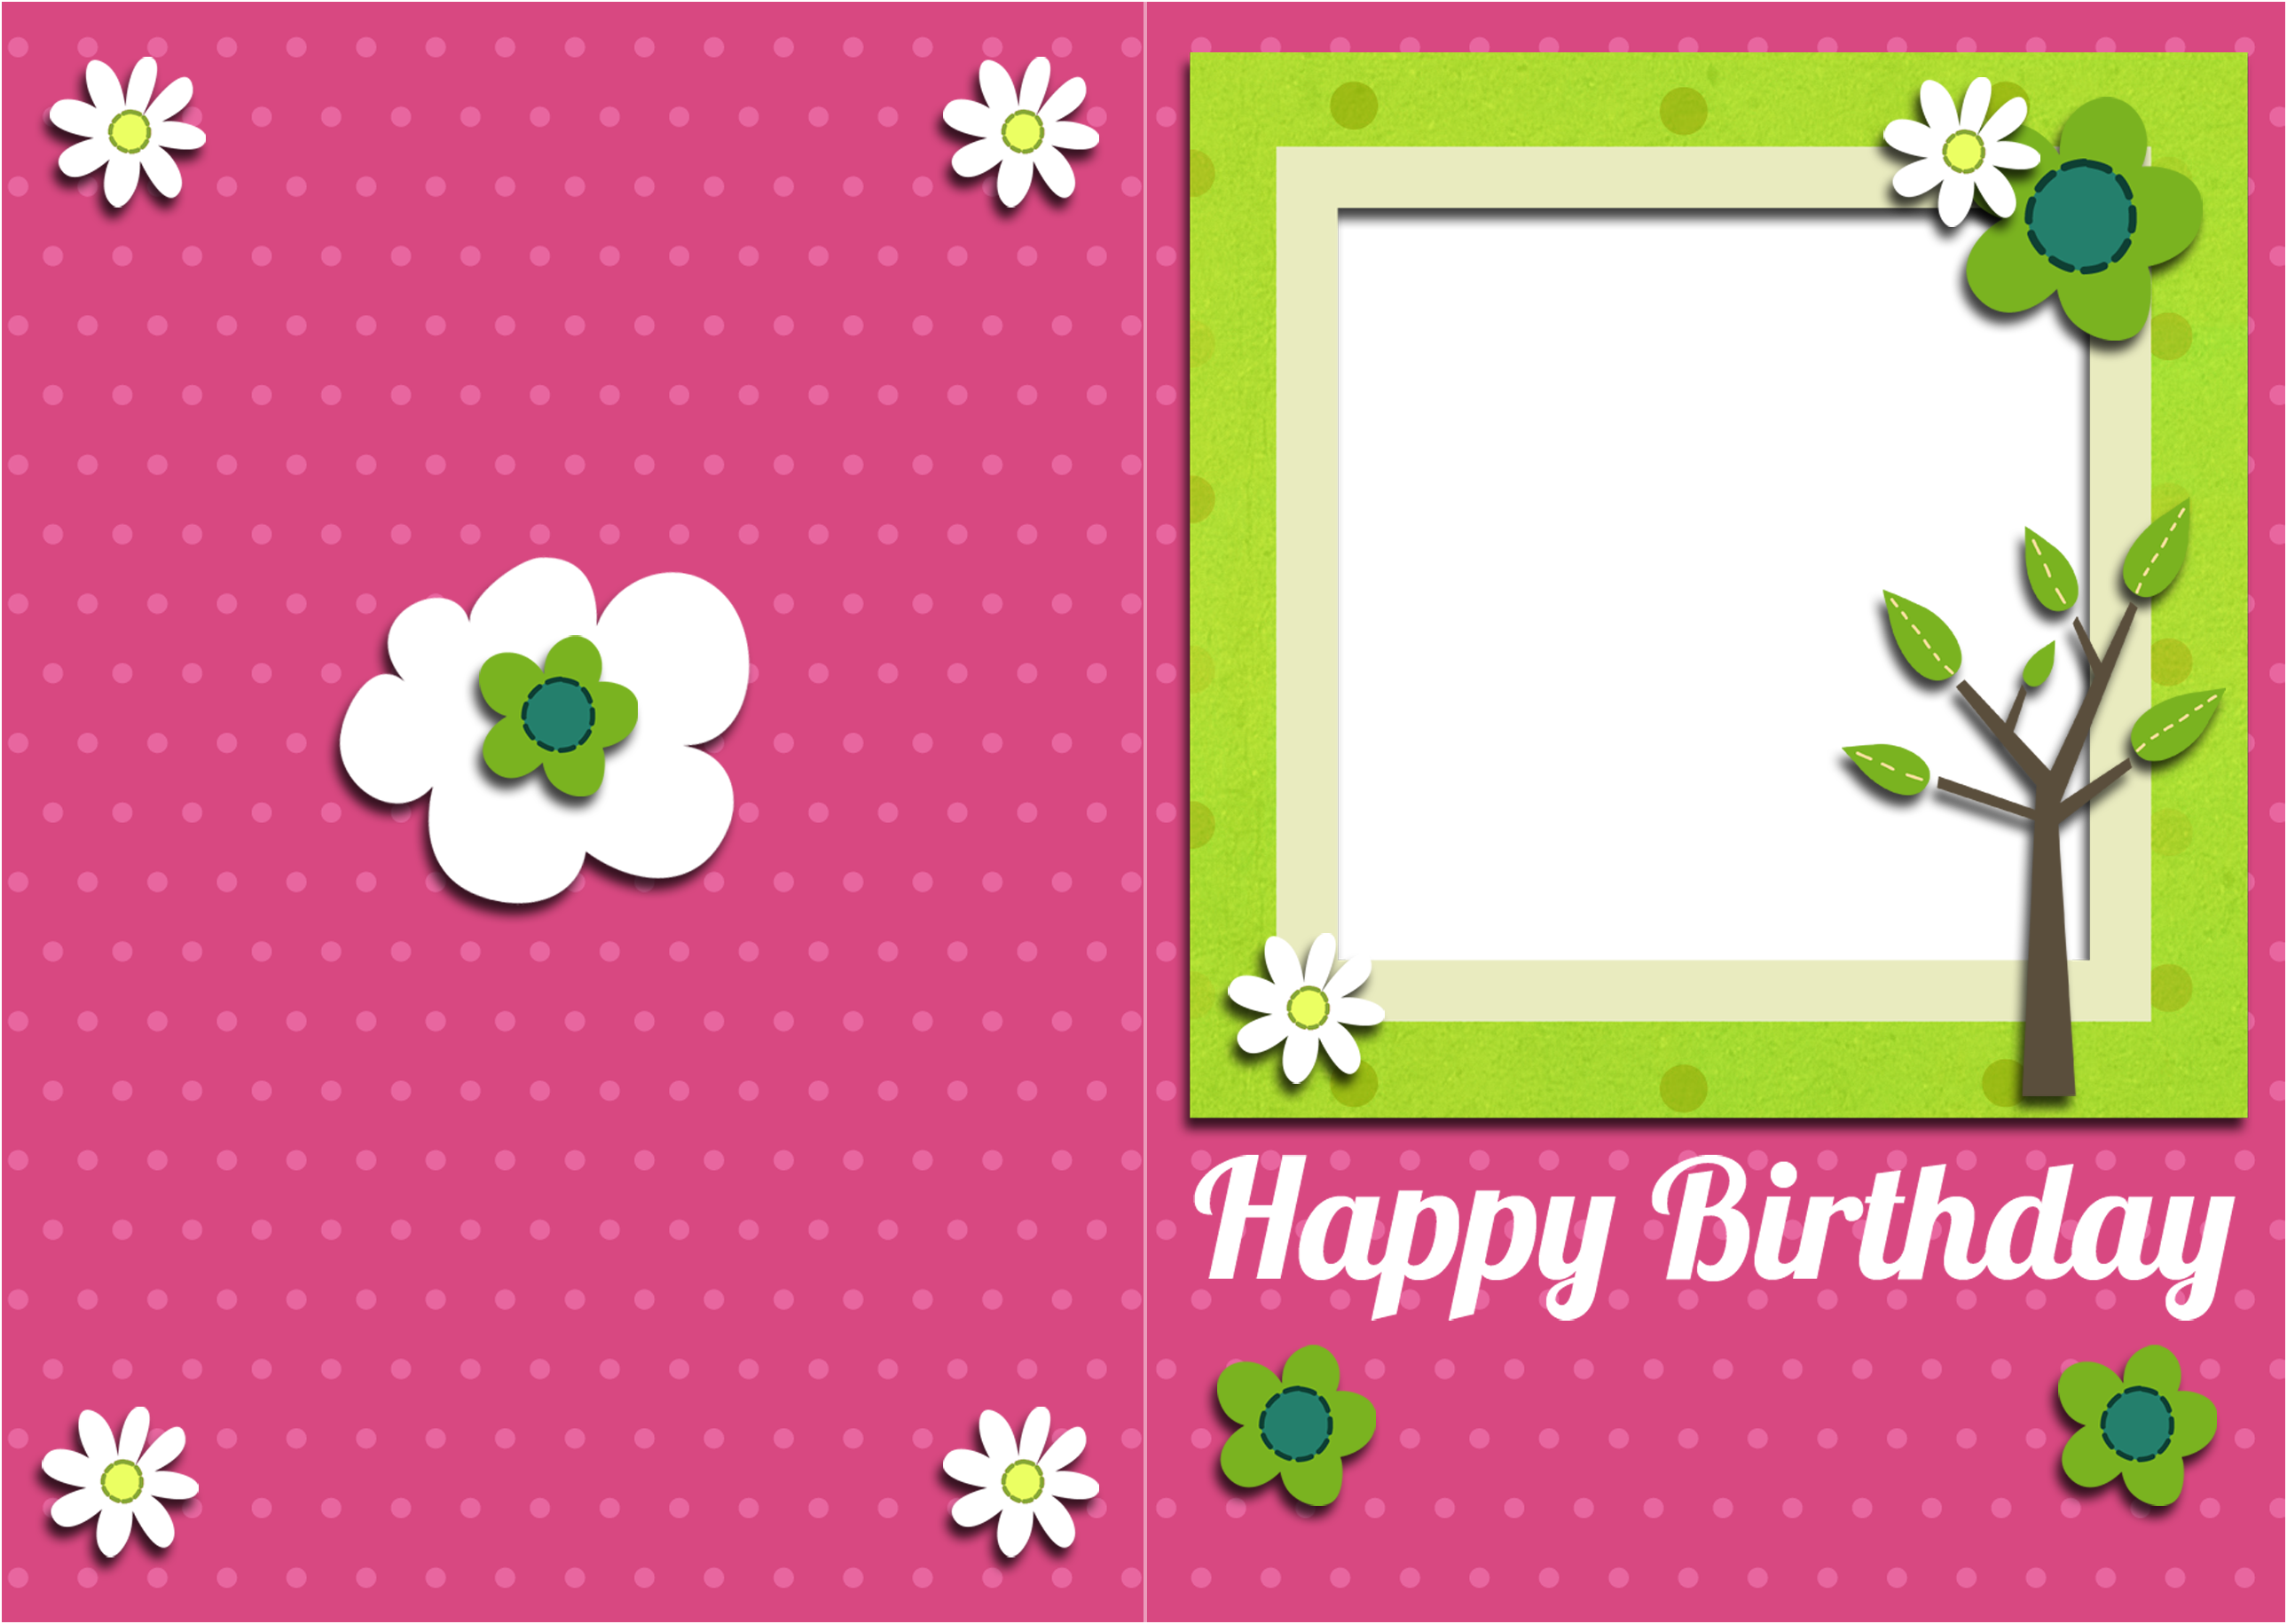 35 Happy Birthday Cards Free To Download The WoW Style